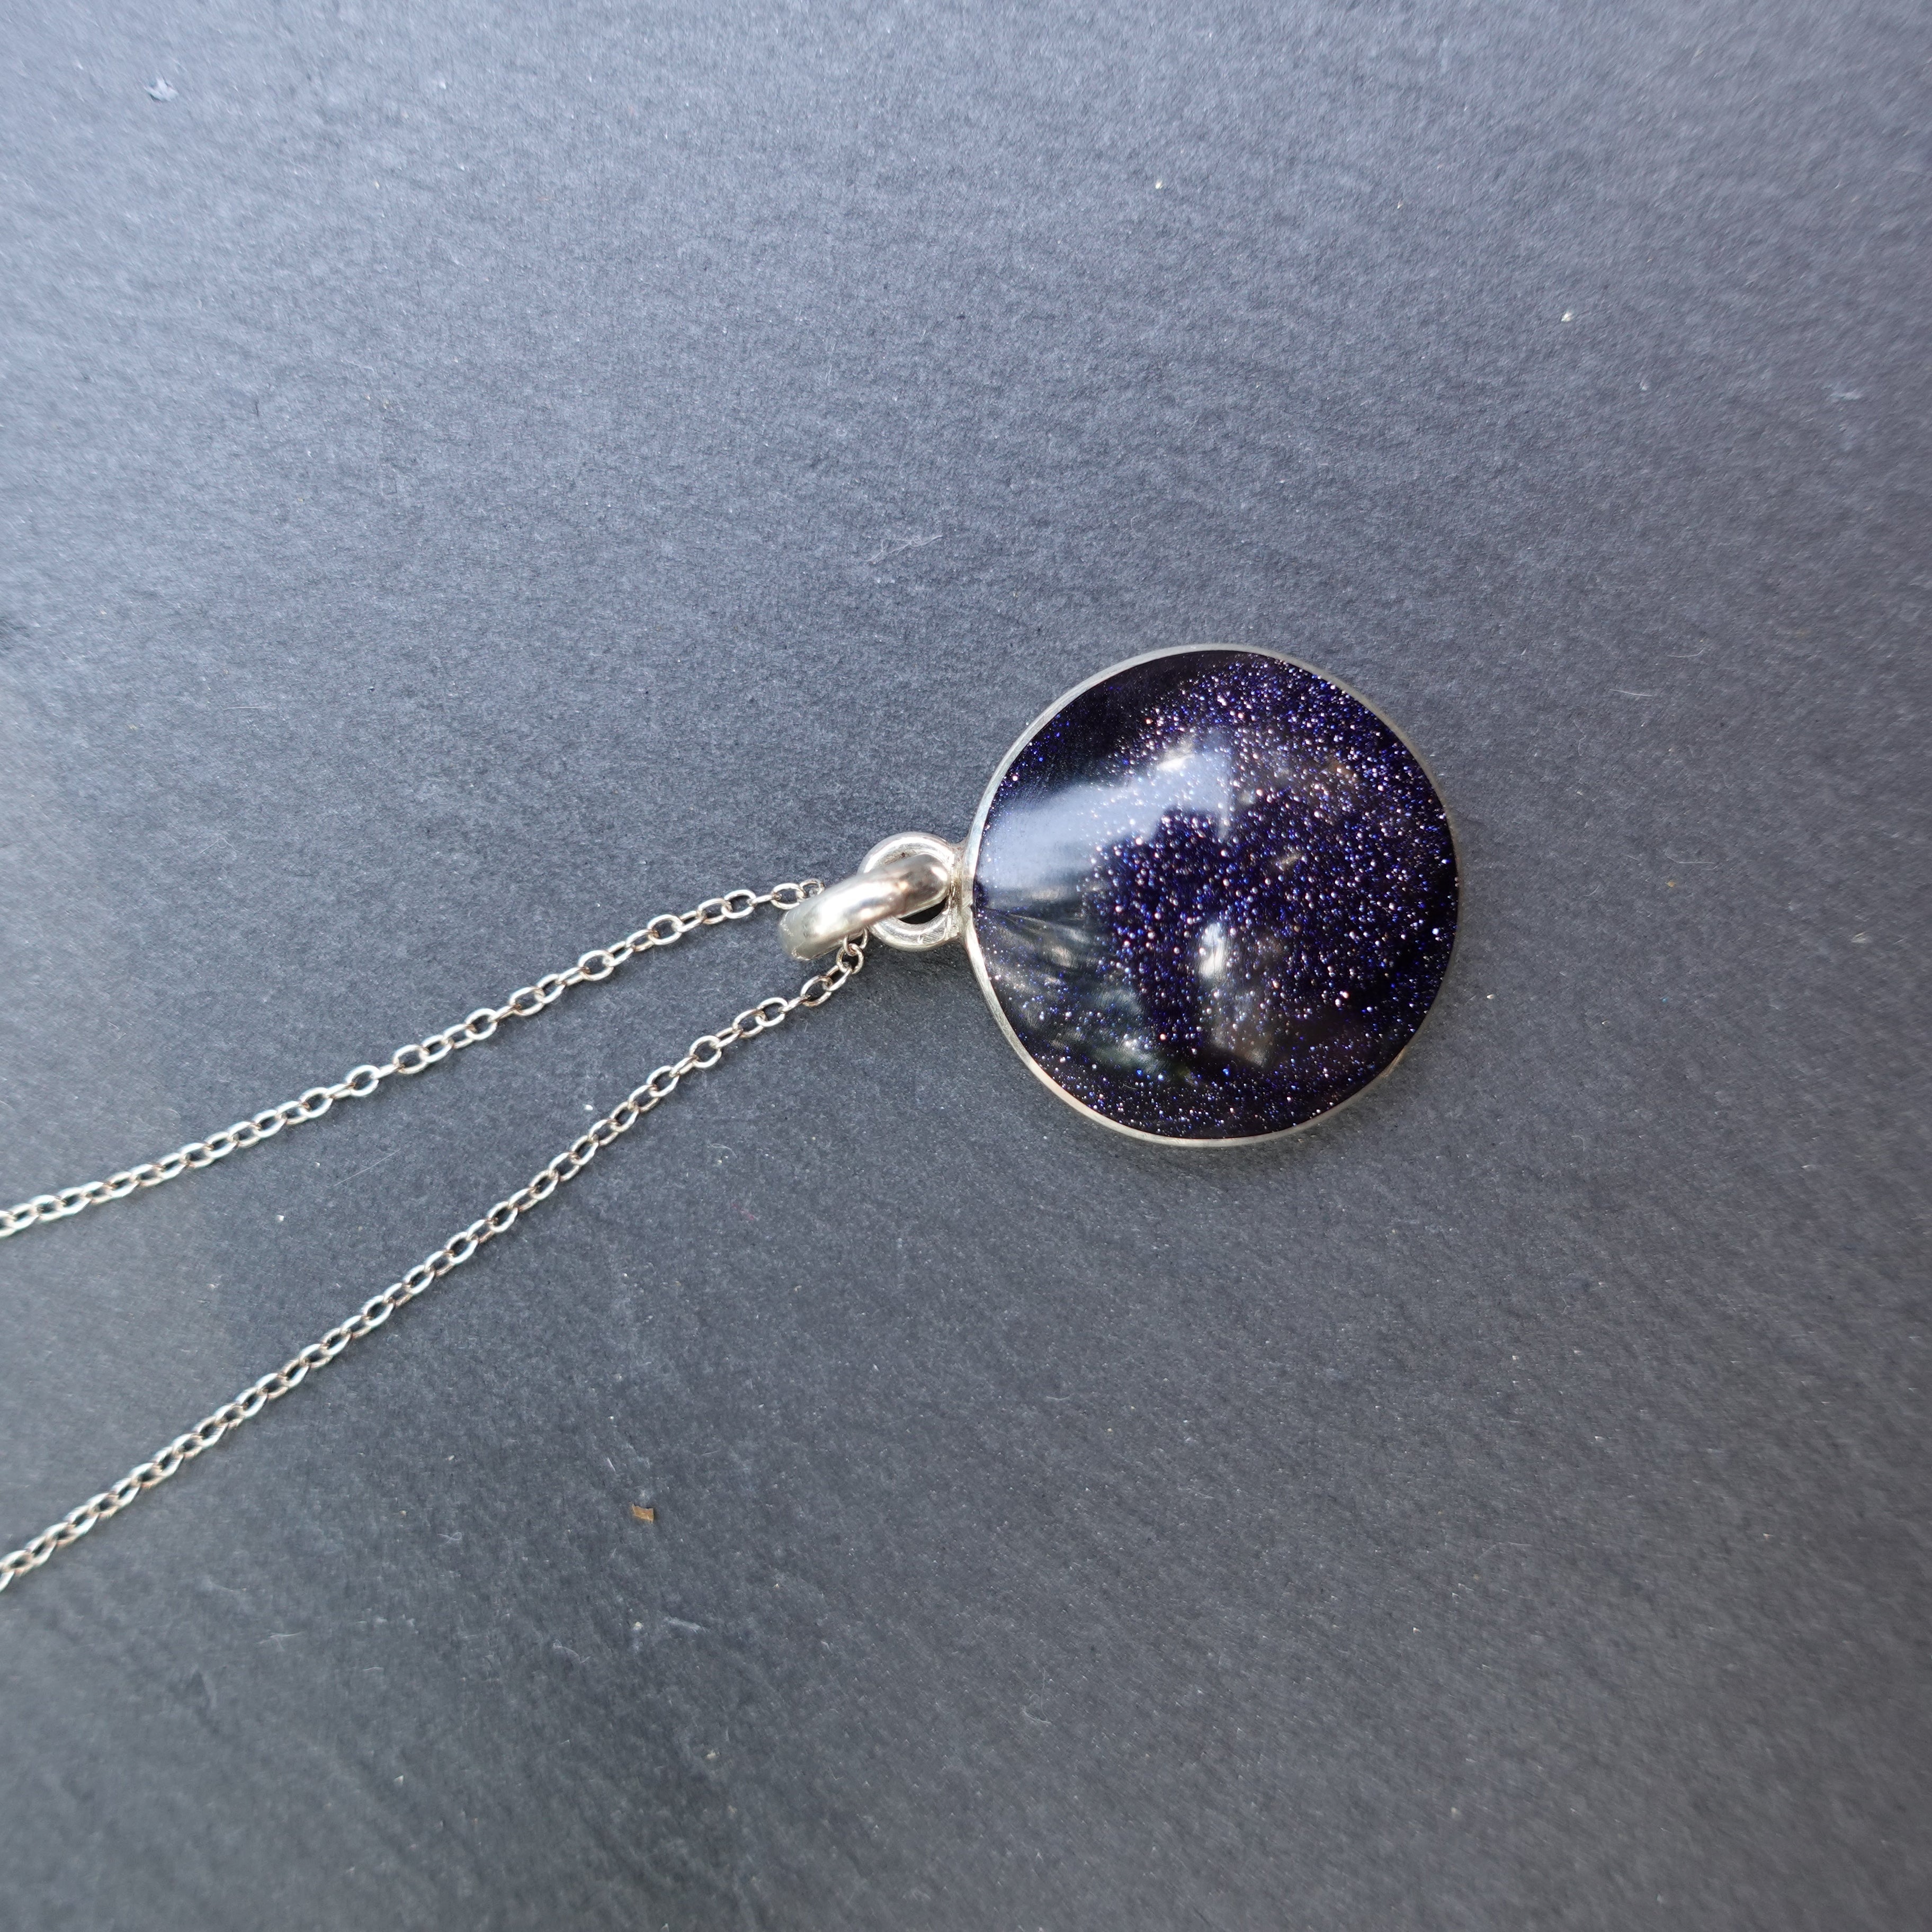 Blue Sandstone and silver 950 round necklace